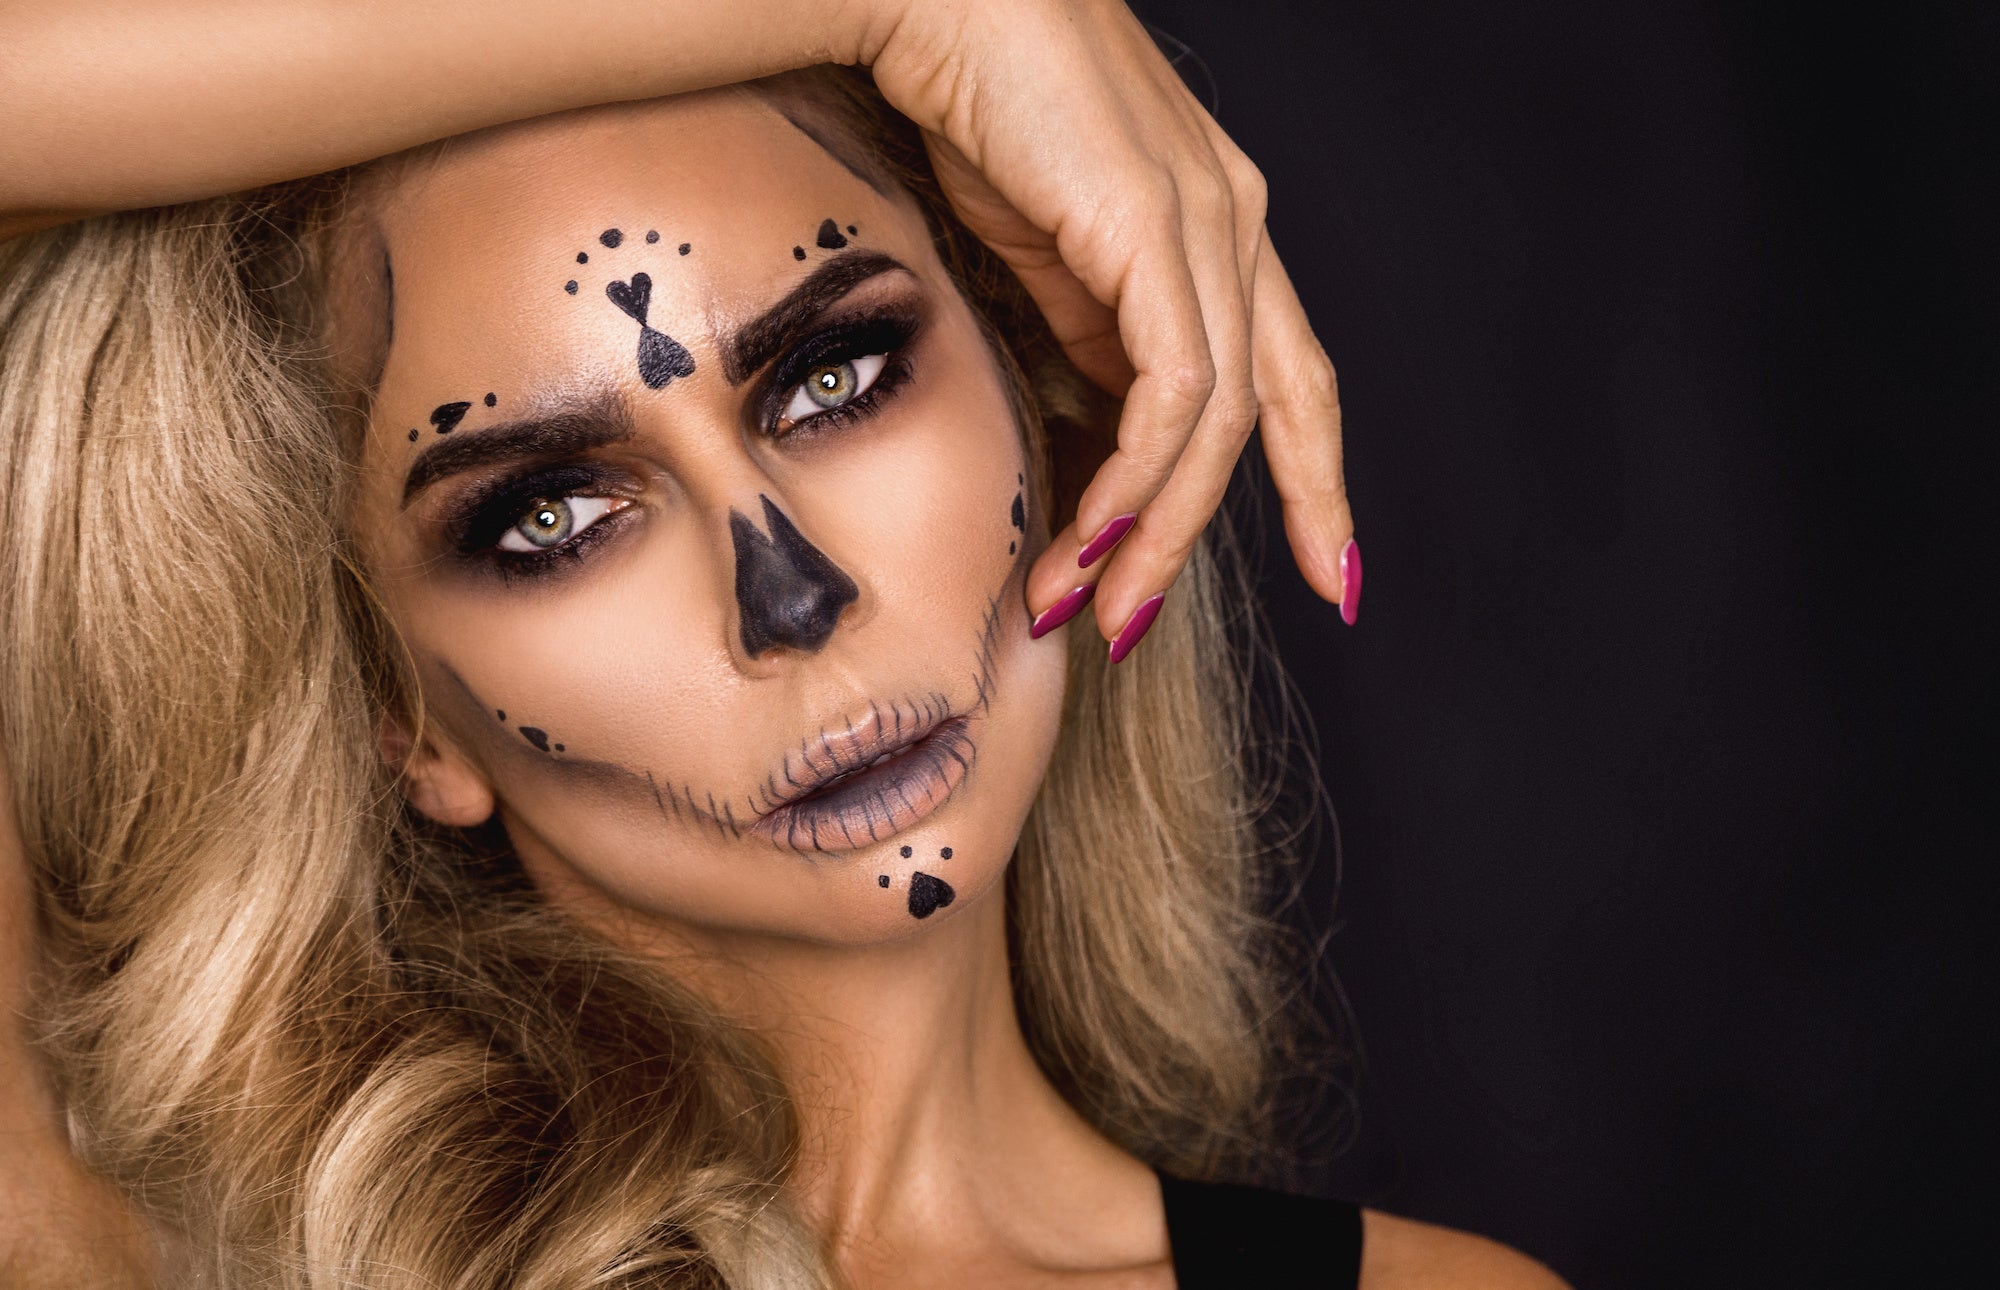 5 Makeup Tips To Save Your Complexion This Halloween – Oxygenetix